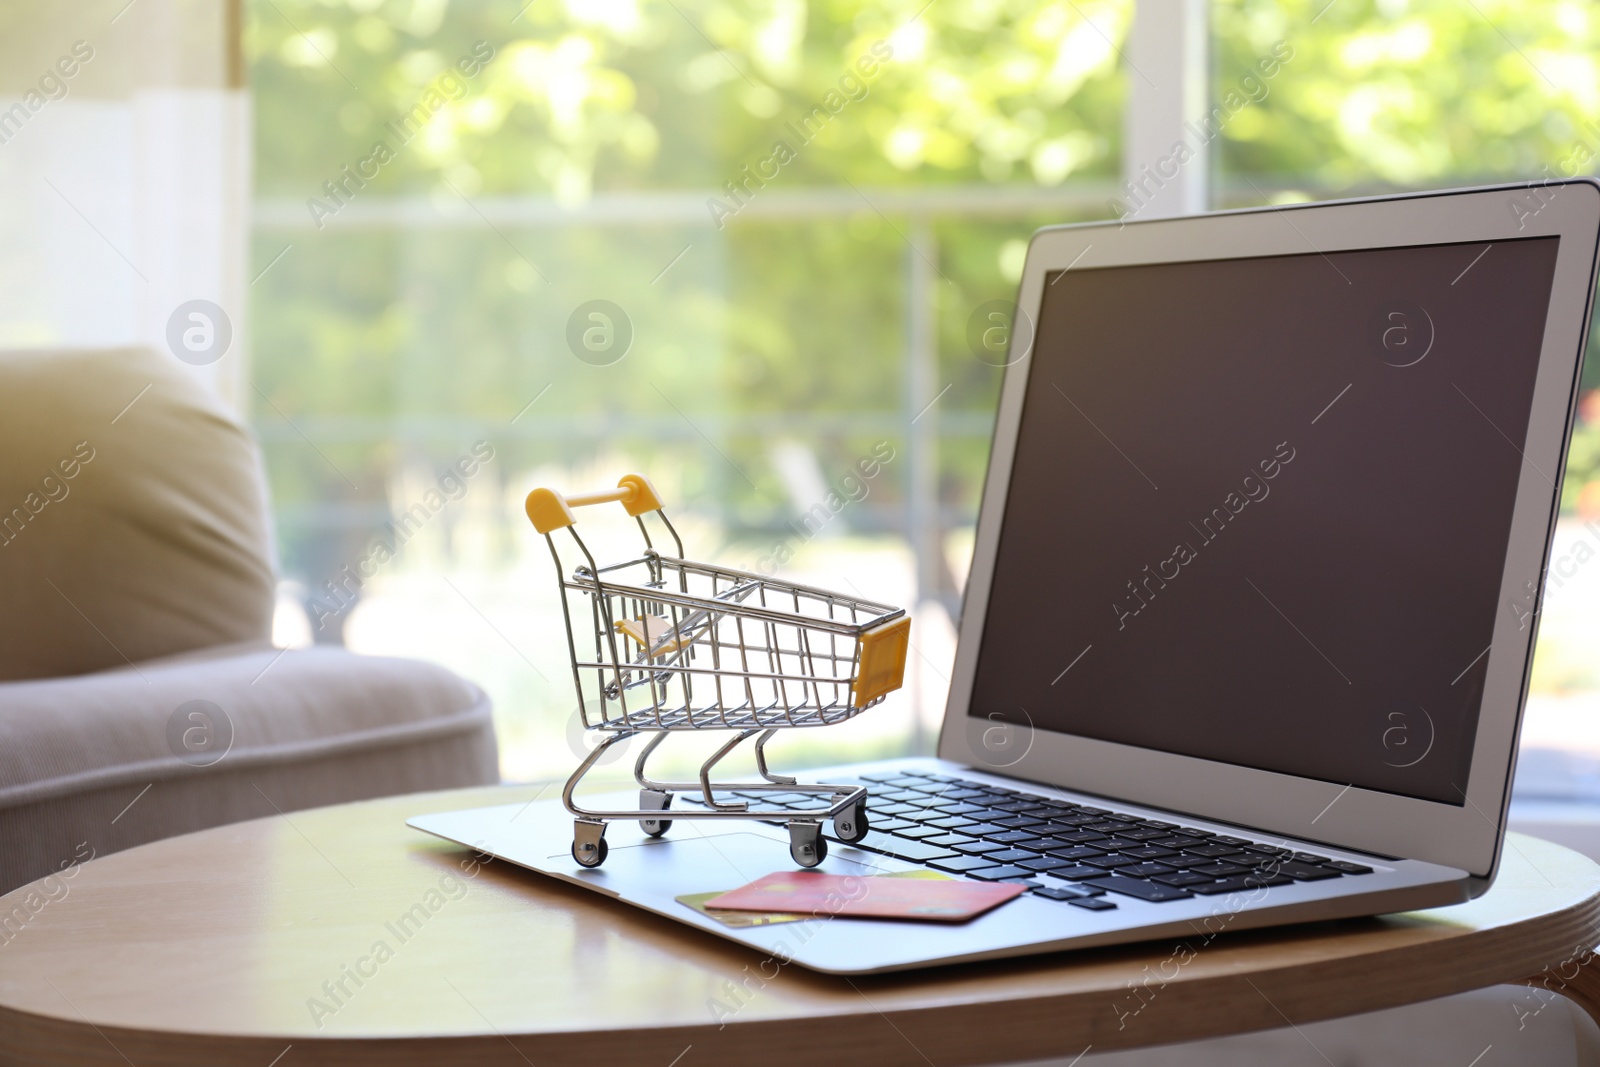 Photo of Internet shopping. Laptop, small cart and credit cards on table indoors